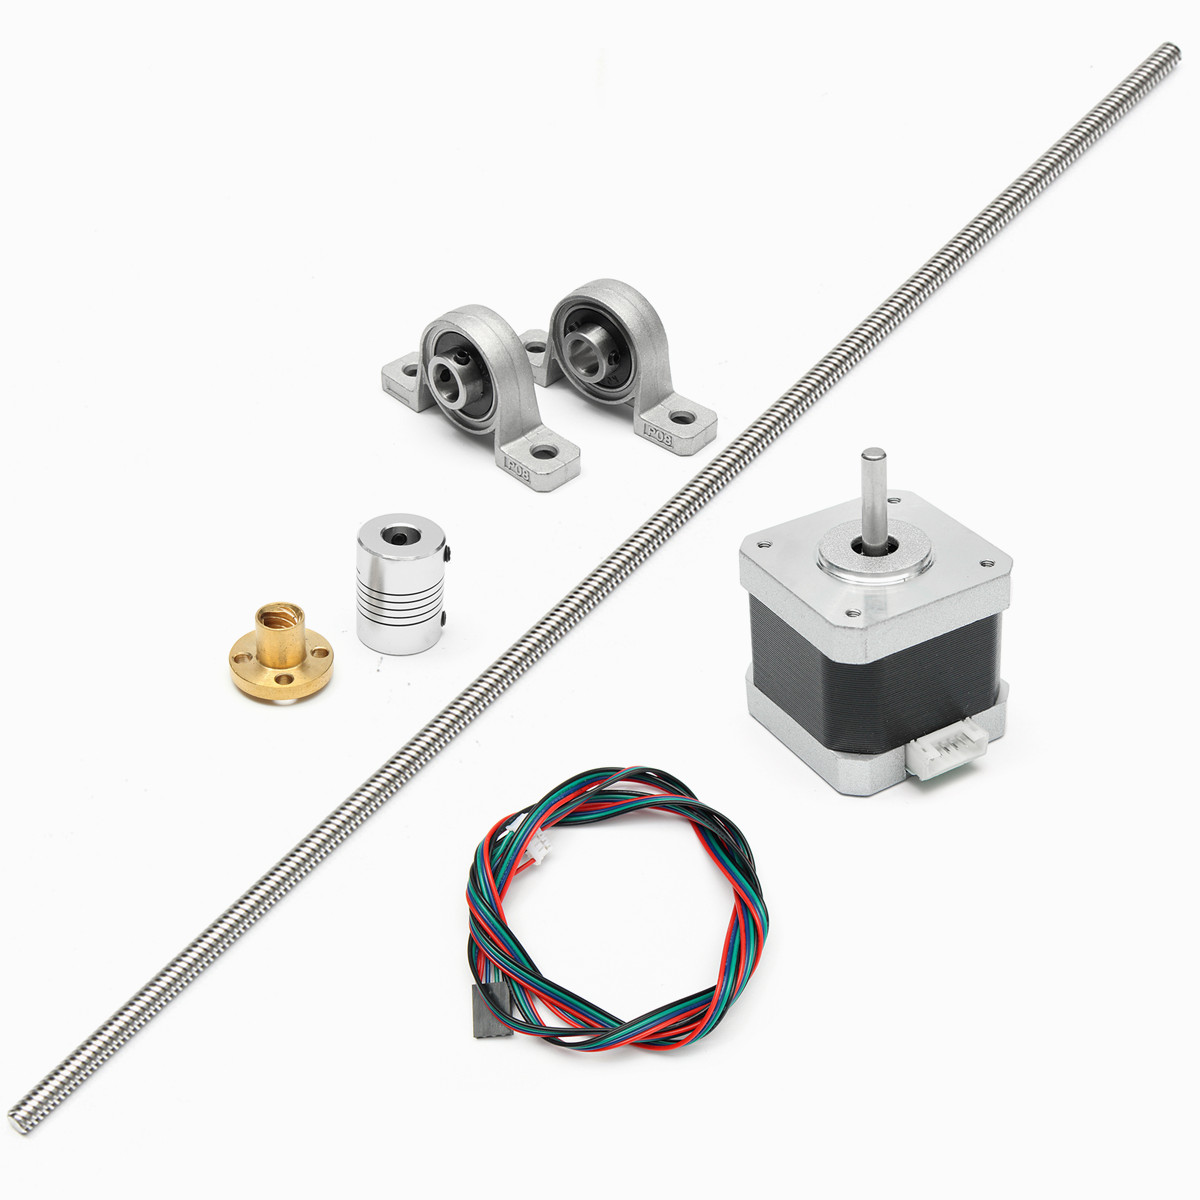 T8 600mm Stainless Steel Lead Screw Coupling Shaft Mounting + Motor For 3D Printer 15